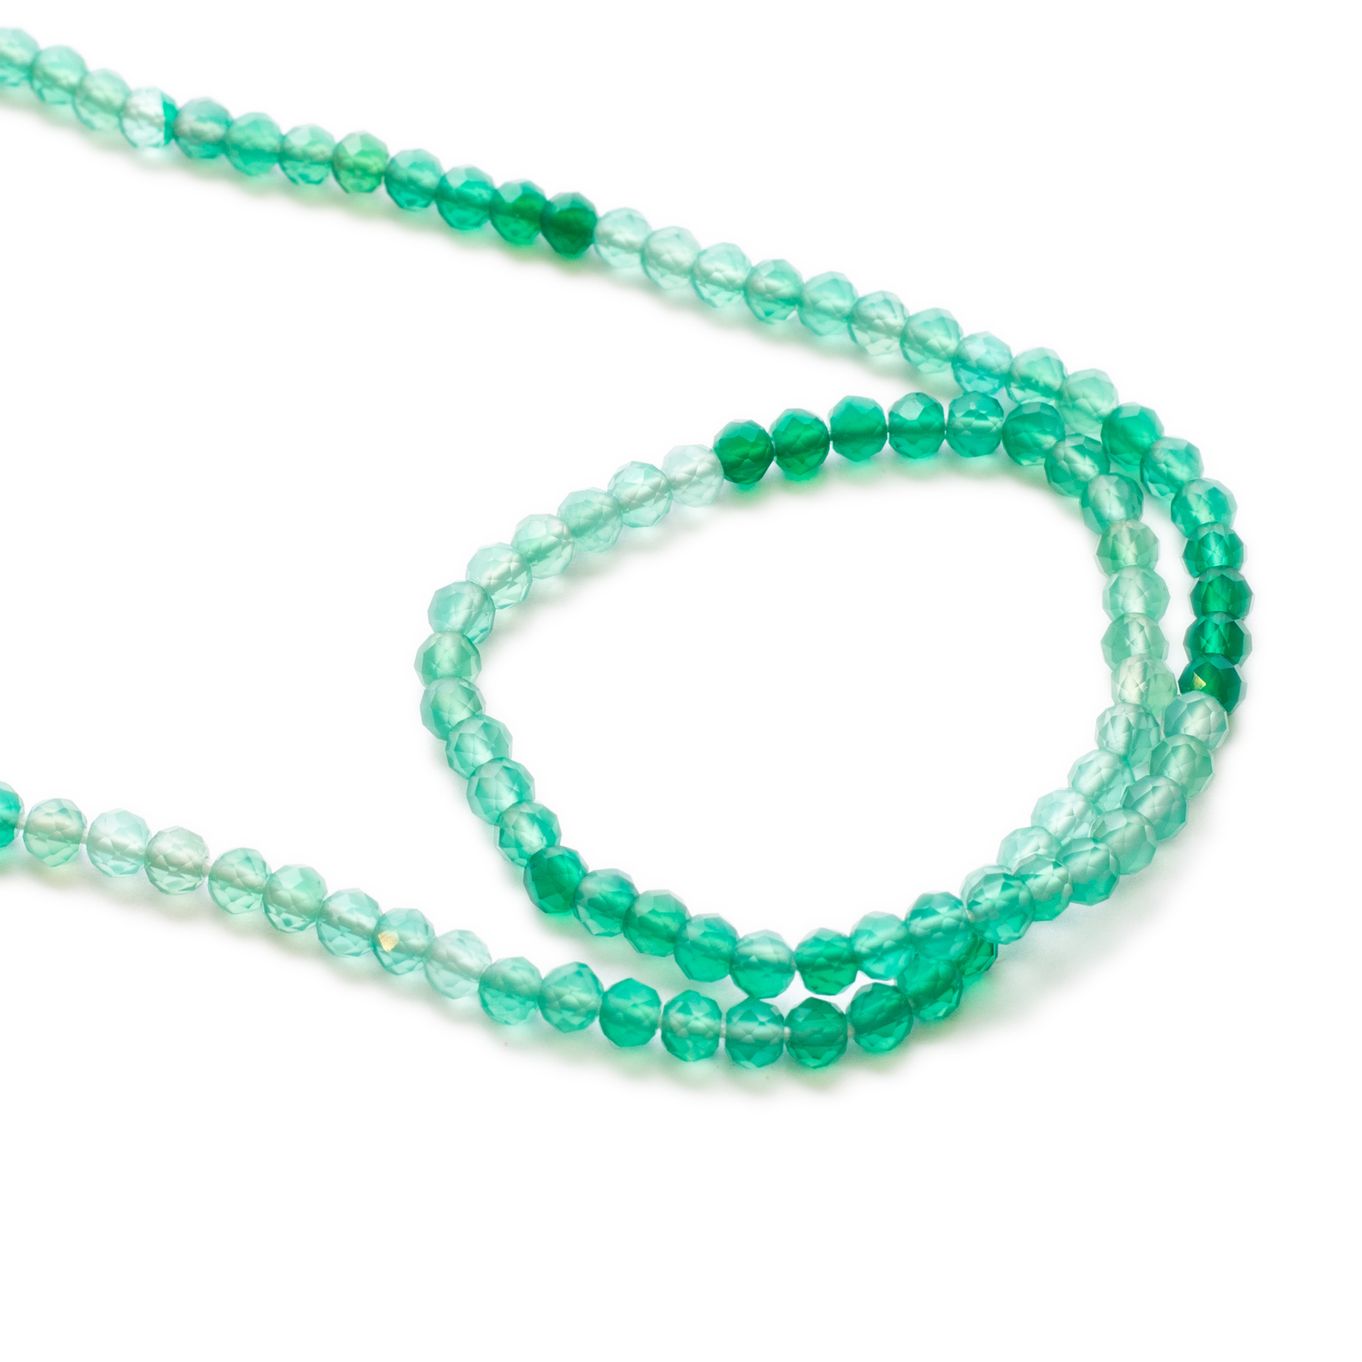 Green Onyx Faceted Rondelle Beads - Approx 3.5x3mm 